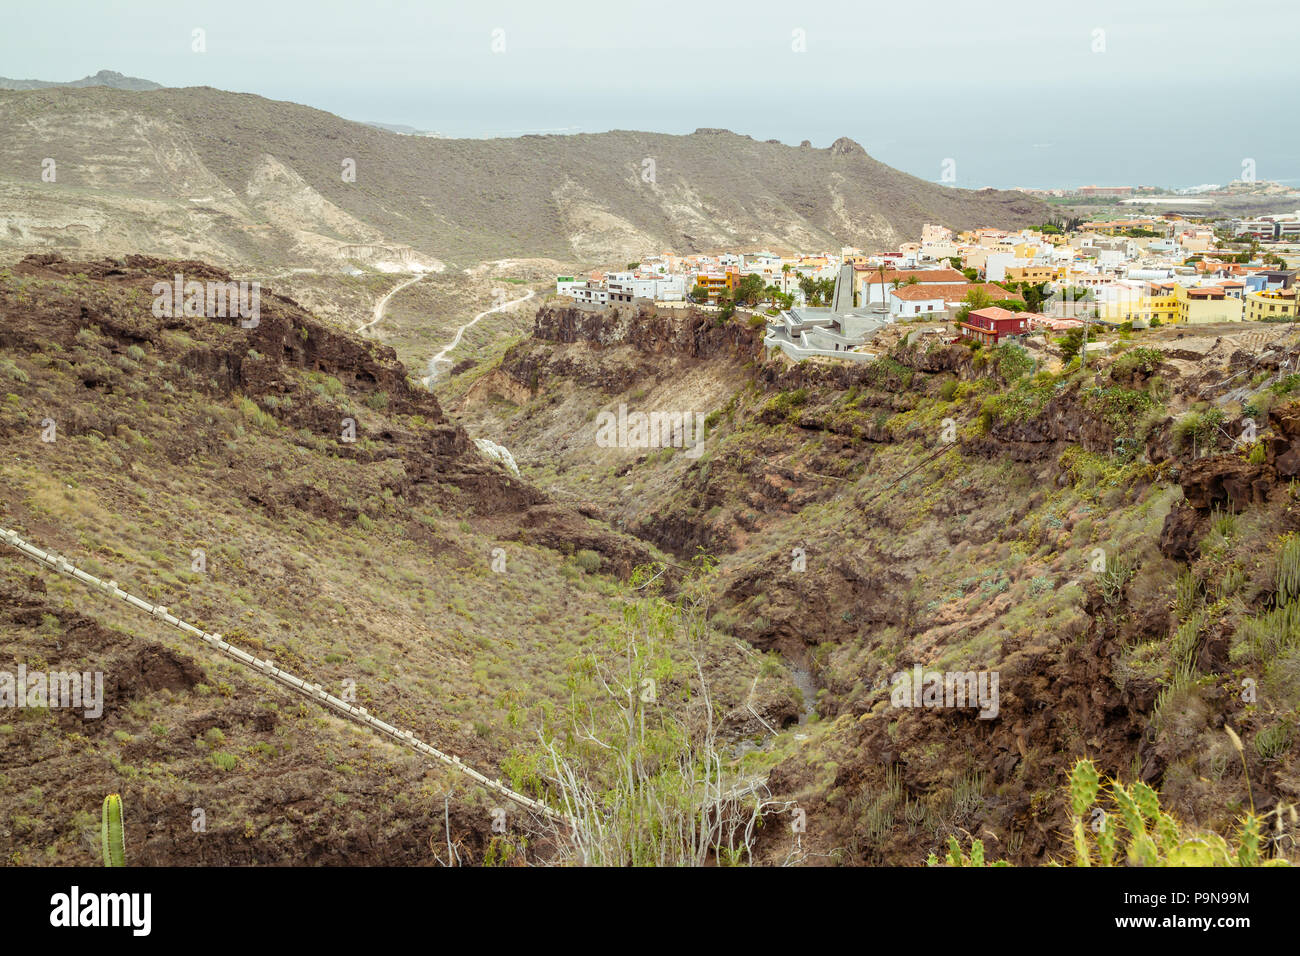 View of Barranco del Infierno (Hell's Gorge) showing the valley or canyon with the town of Adeje above with bright buildings, Atlantic Ocean, green Stock Photo